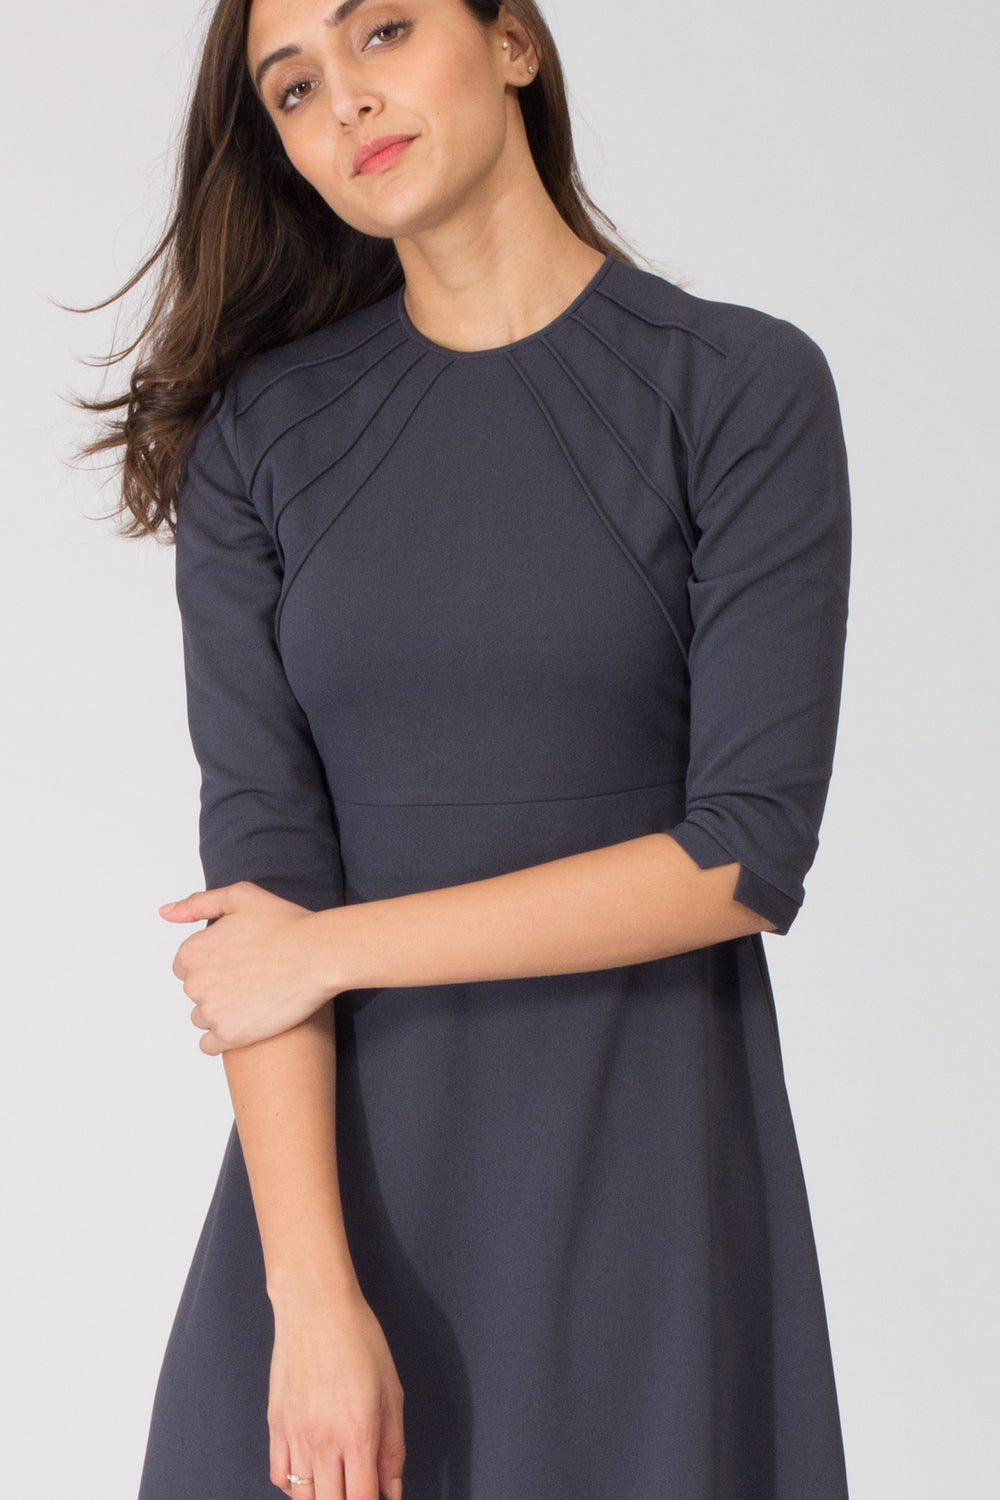 Grey Sun Fit and Flare Dress